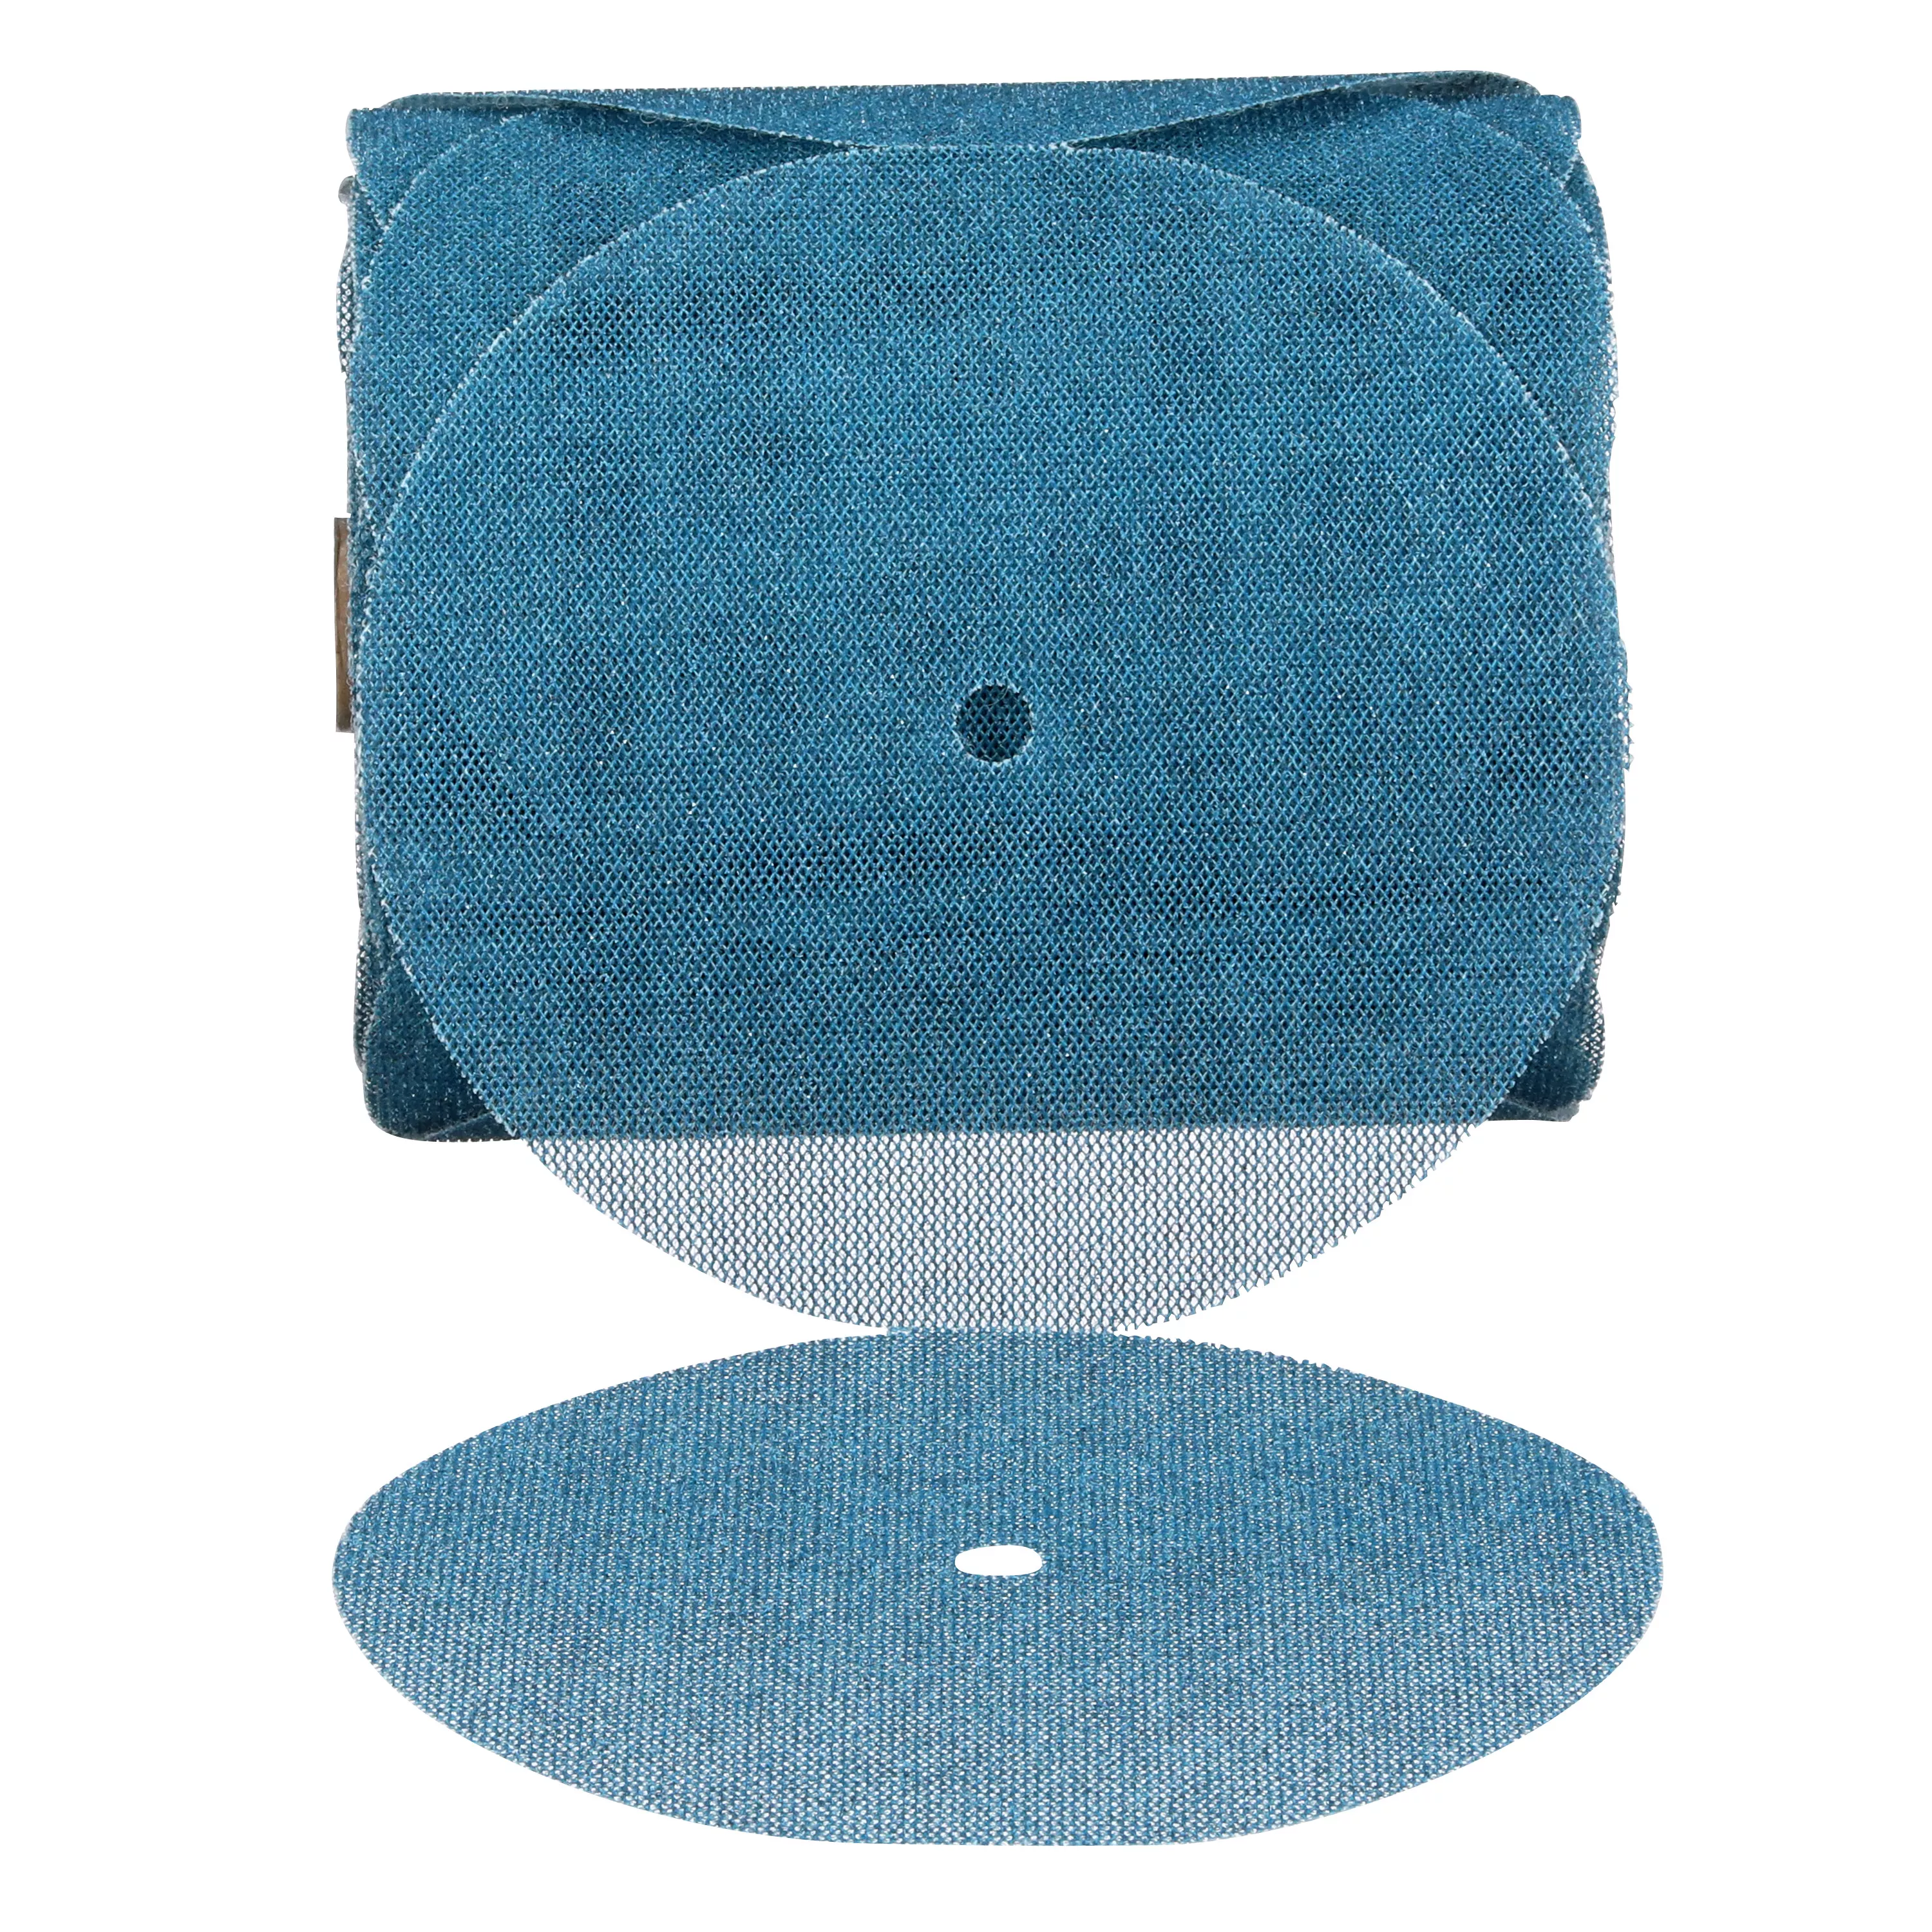 Product Number 310W | 3M™ Blue Net Disc Roll 36420